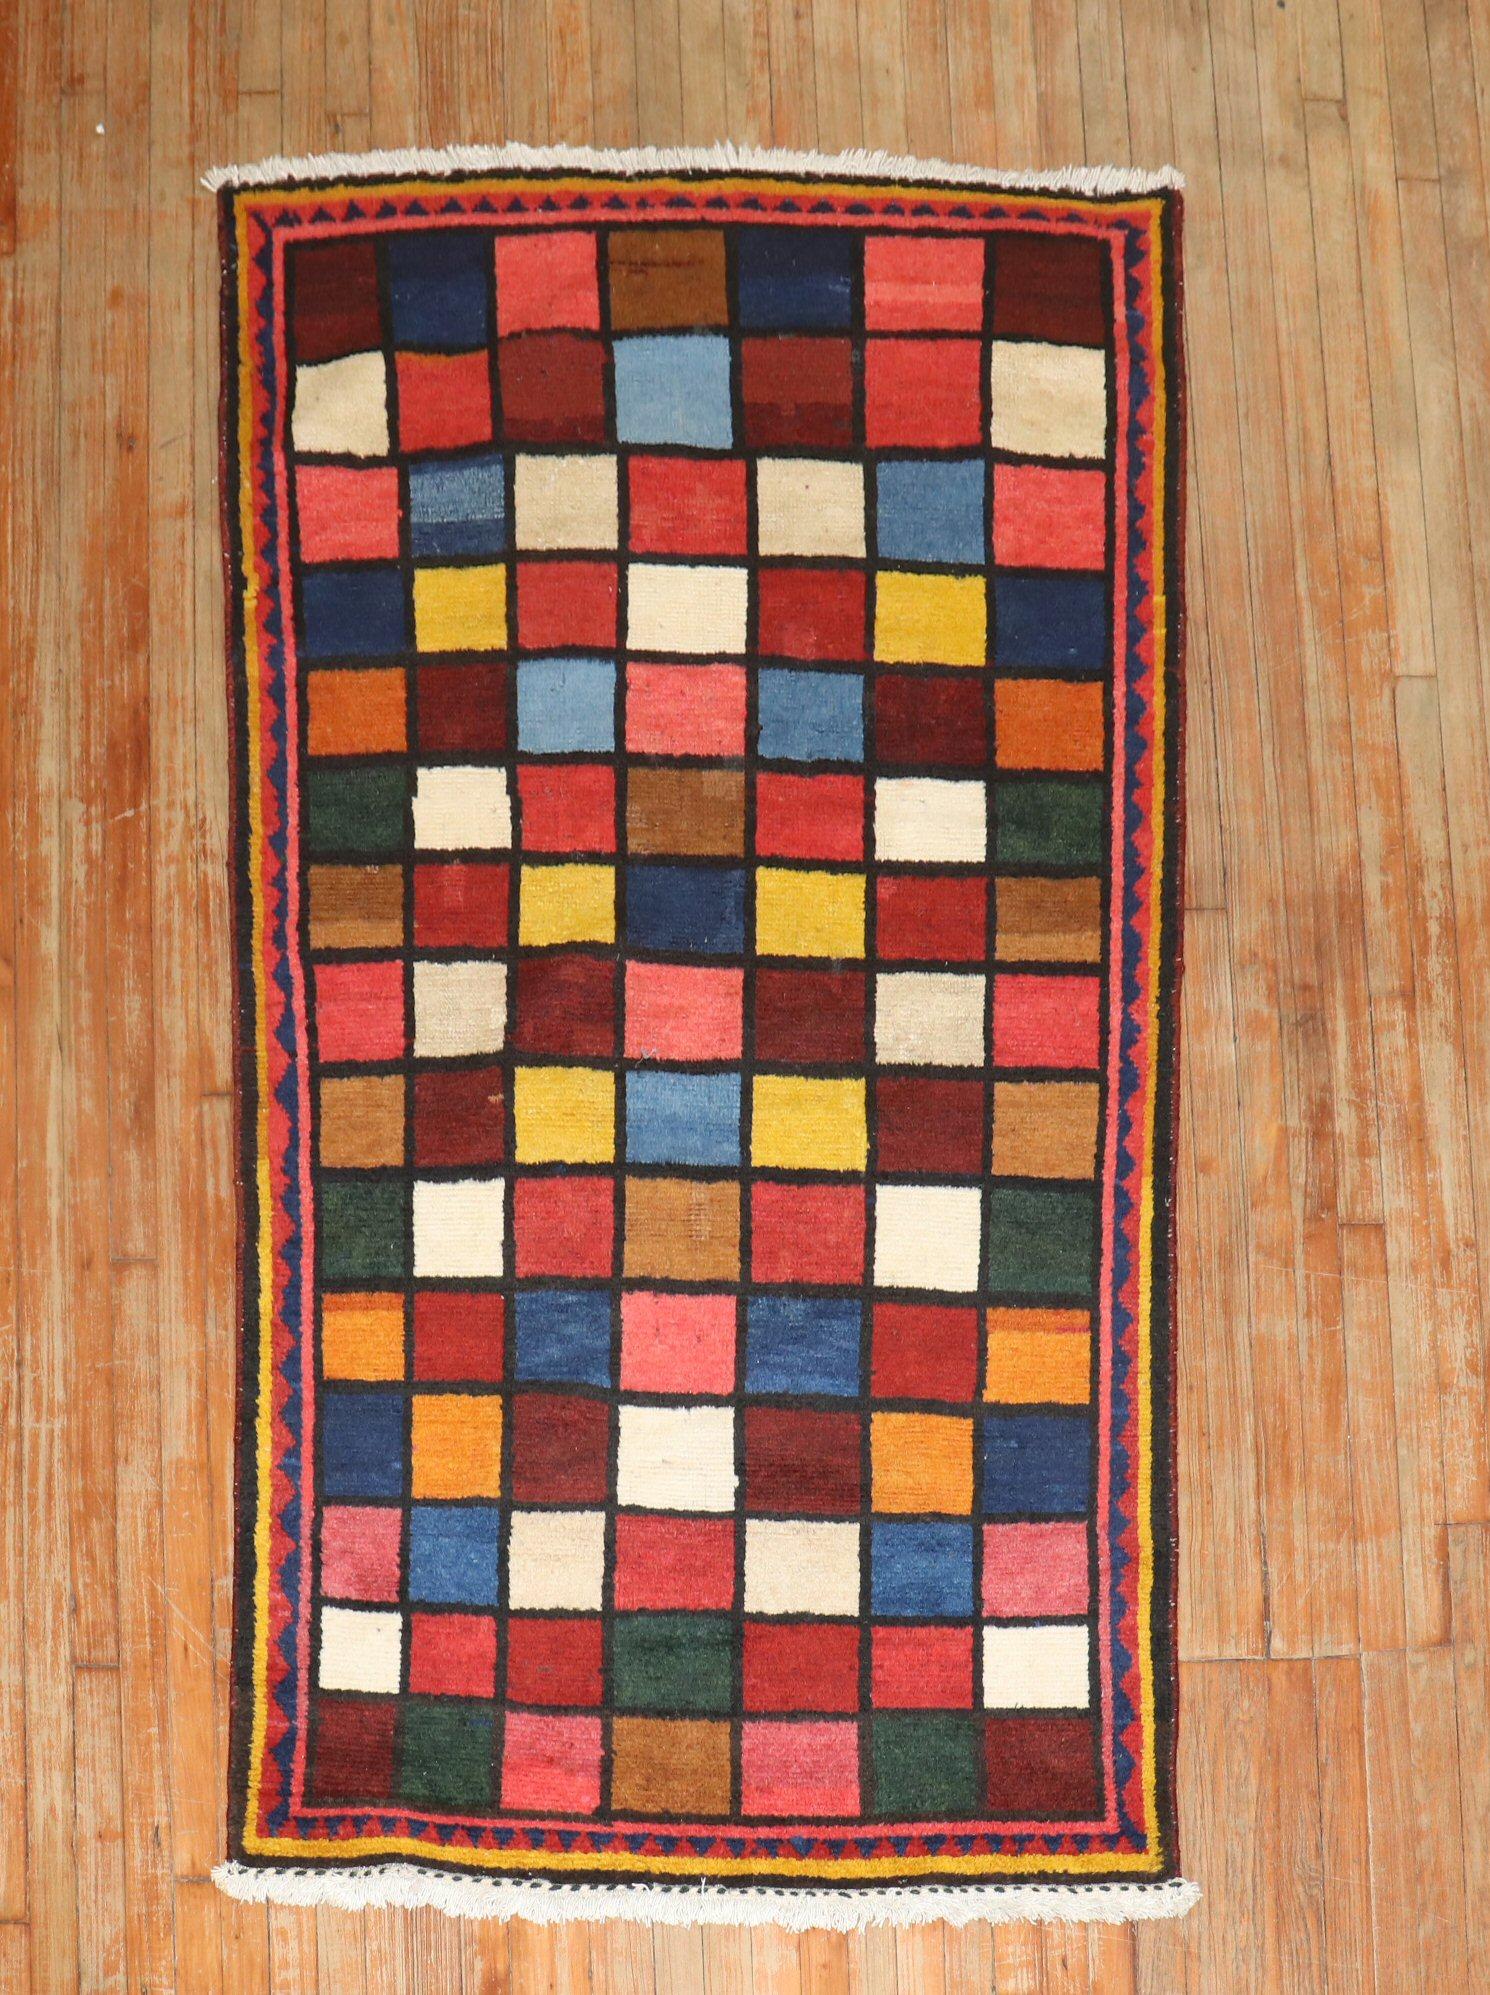 Mid-20th Century Persian Gabbeh rug with an all-over checkerboard design

Measures: 4'' x 7'.